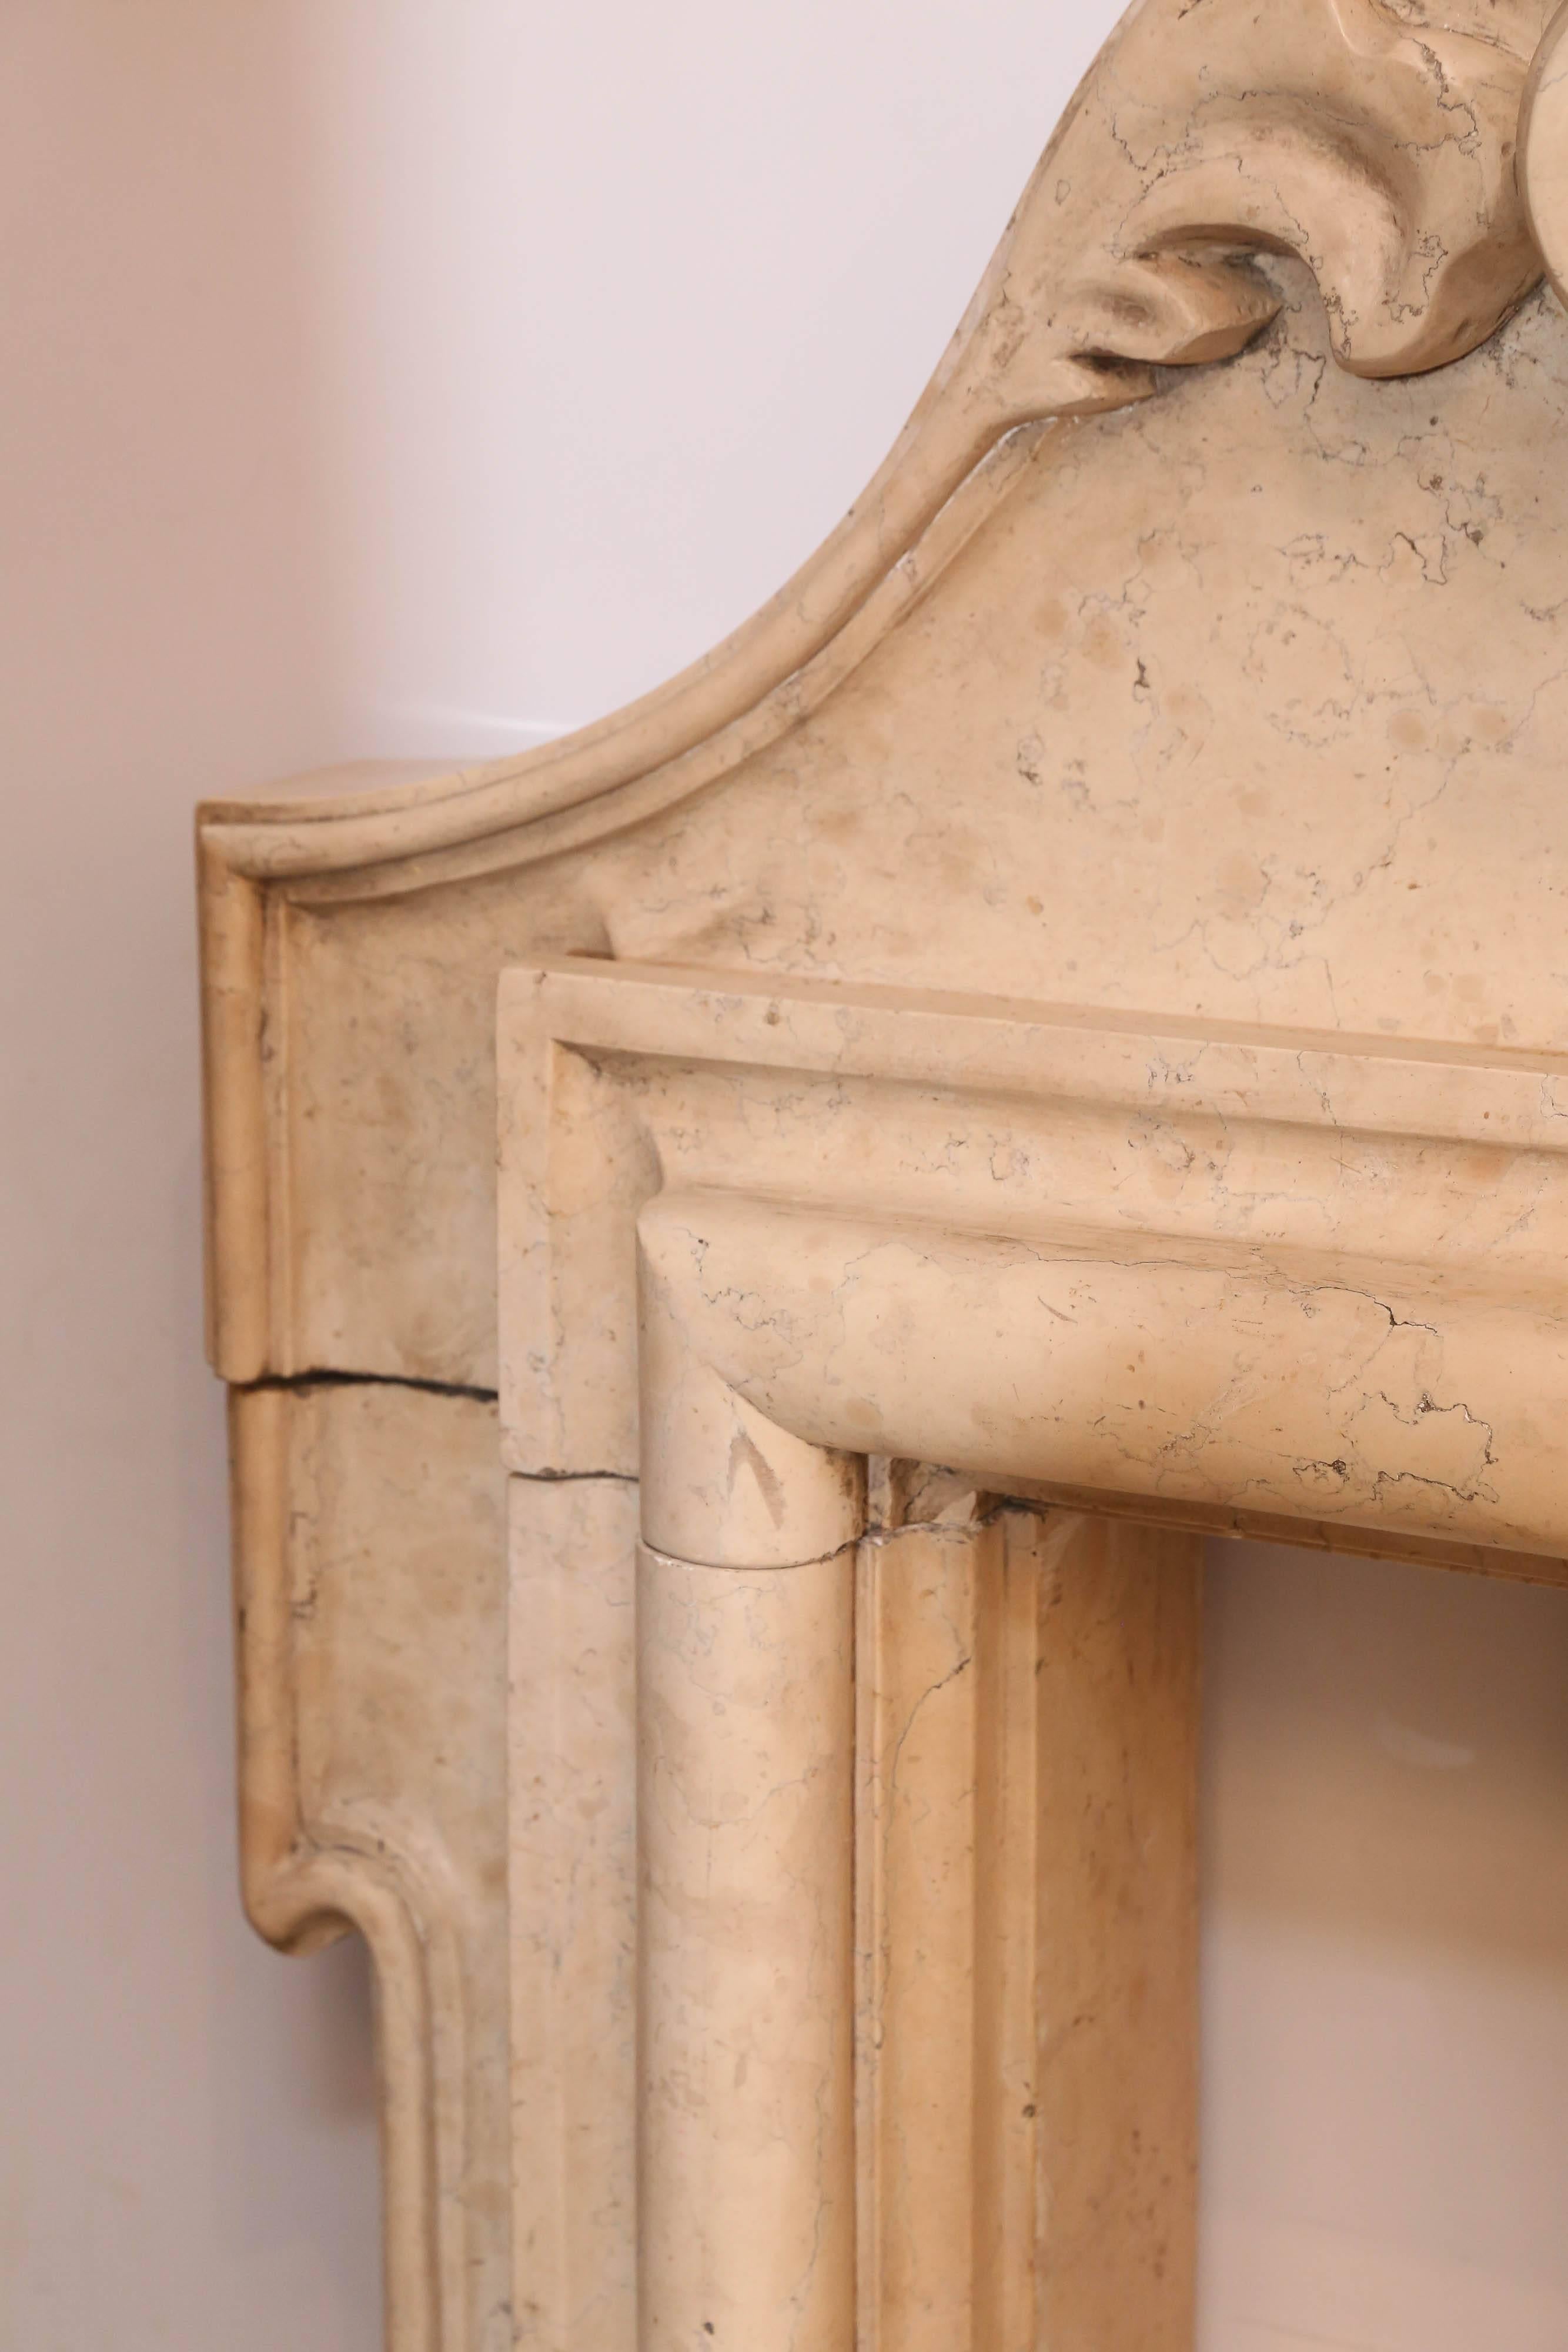 Antique Italian fireplace is carved in a neutral marble with no veins.
Large cartouche is on top with two decorative carvings on either side.
Mantel sides have a simple carving on top of
with a more decorative carving on the bottom corners.
 